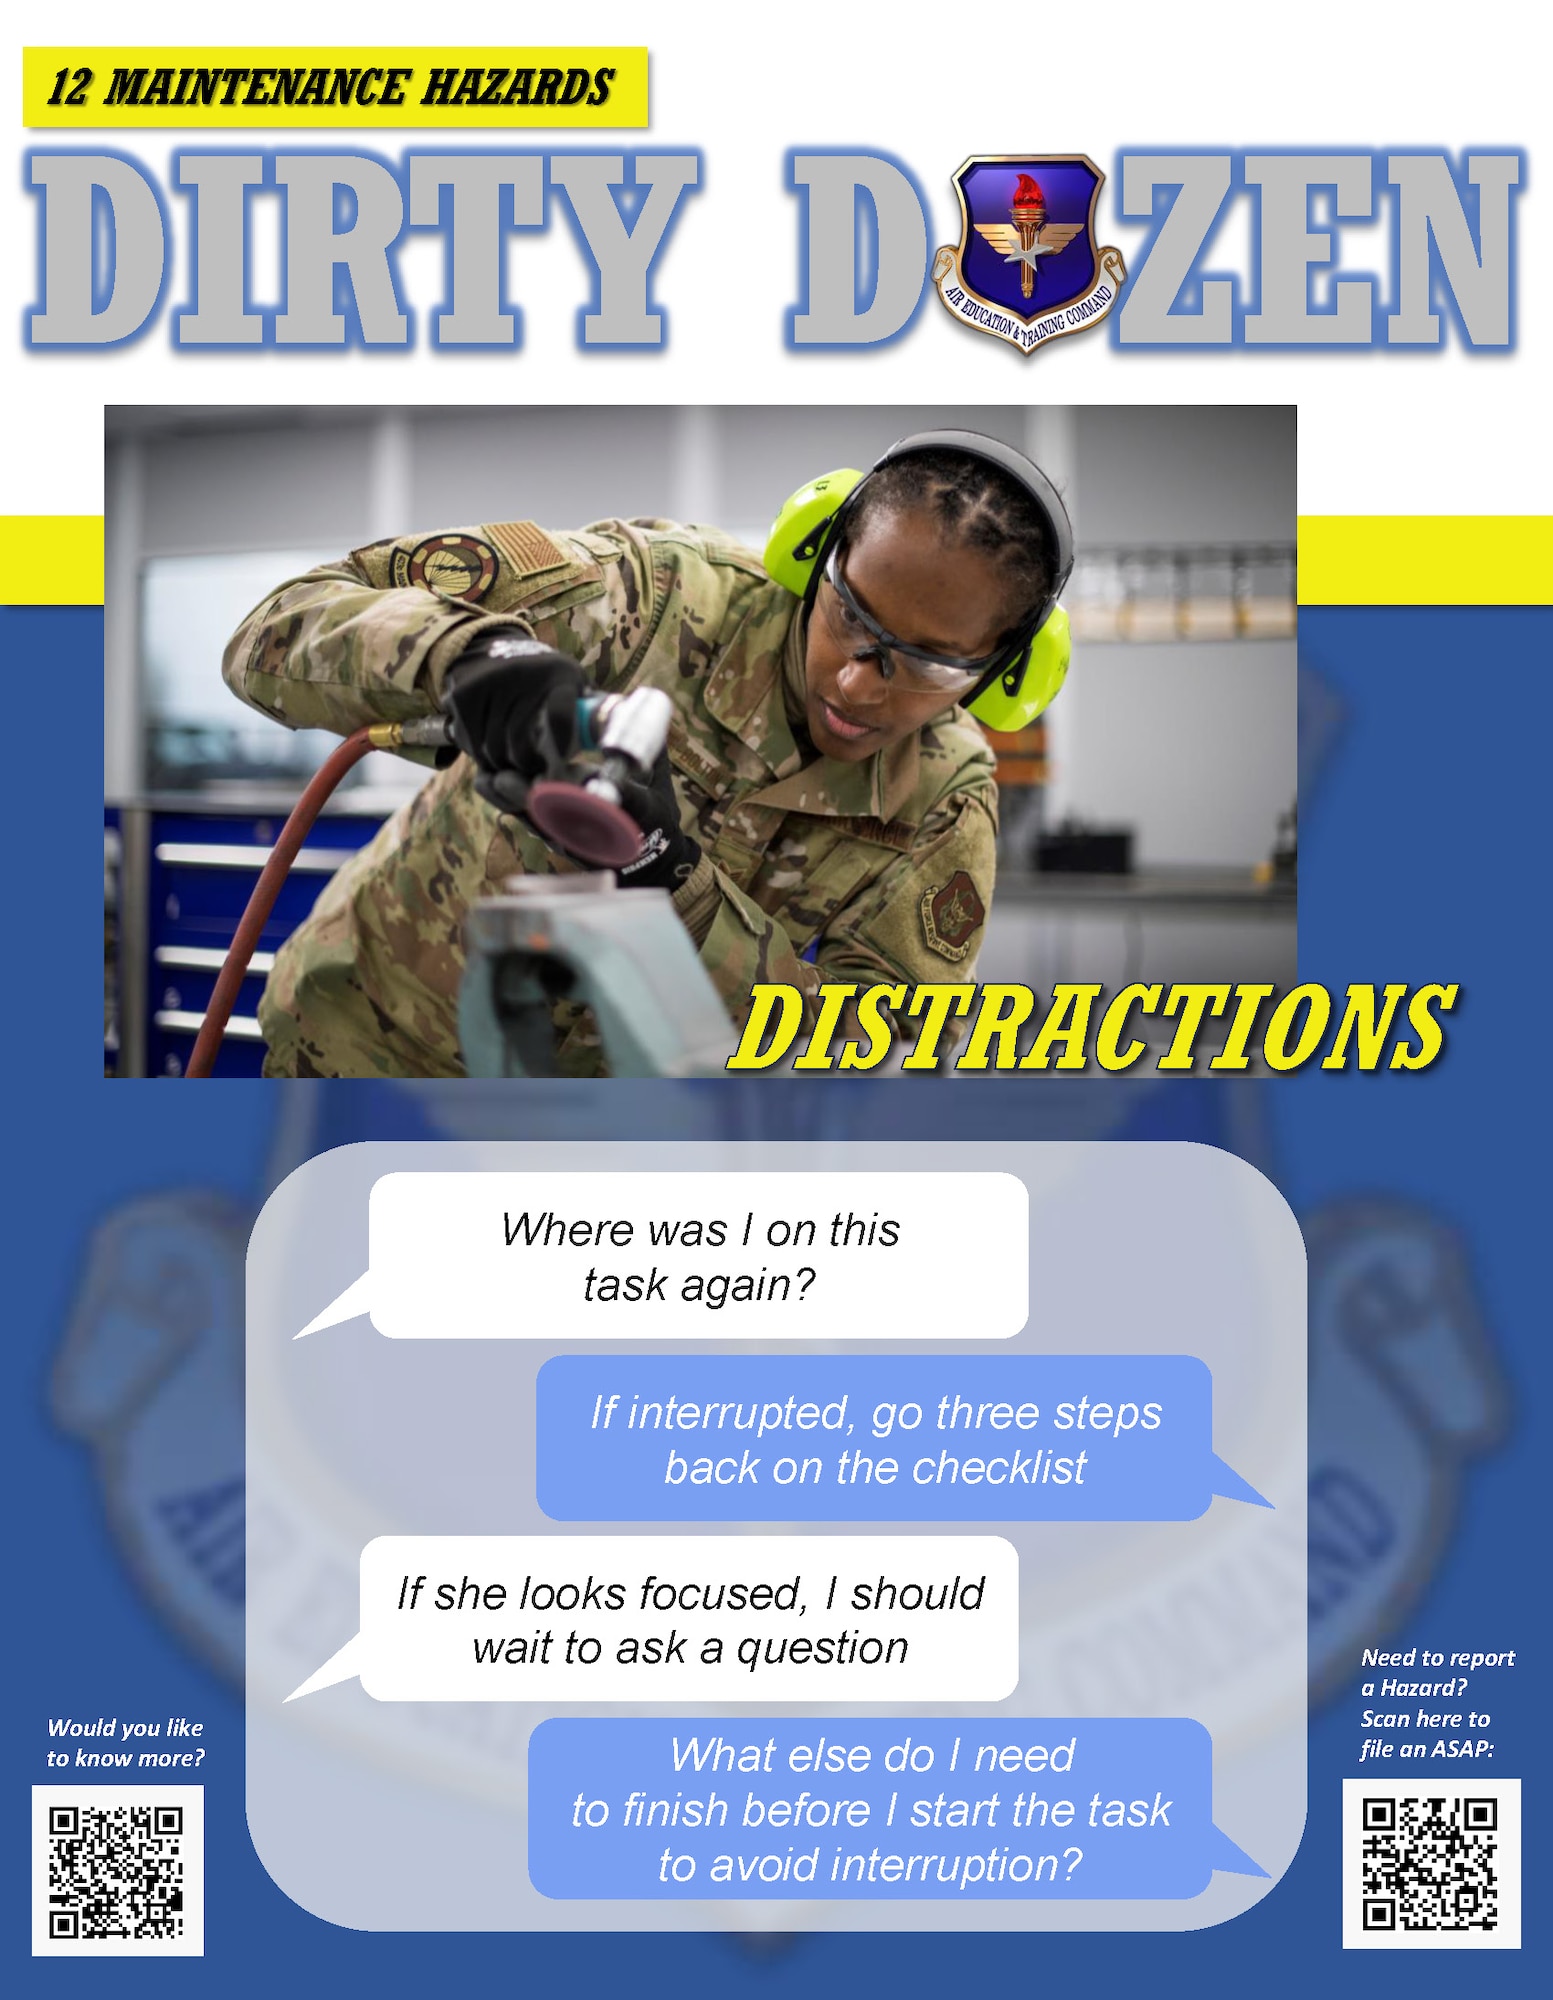 Distractions is one of the Dirty Dozen, which highlights common human error factors in aircraft maintenance mishaps.